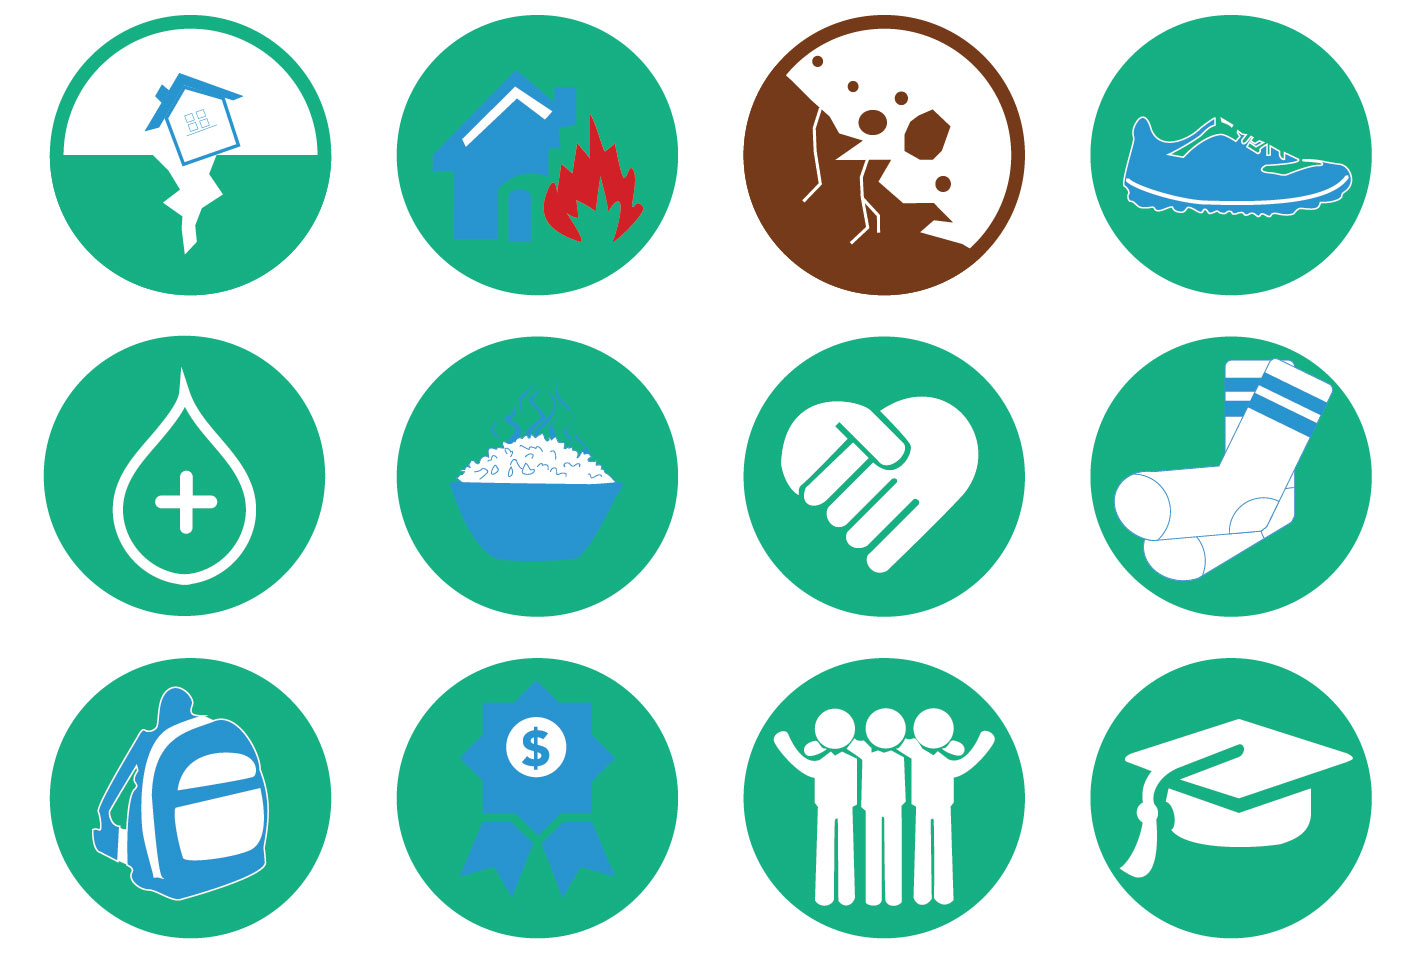 charity infographic icons